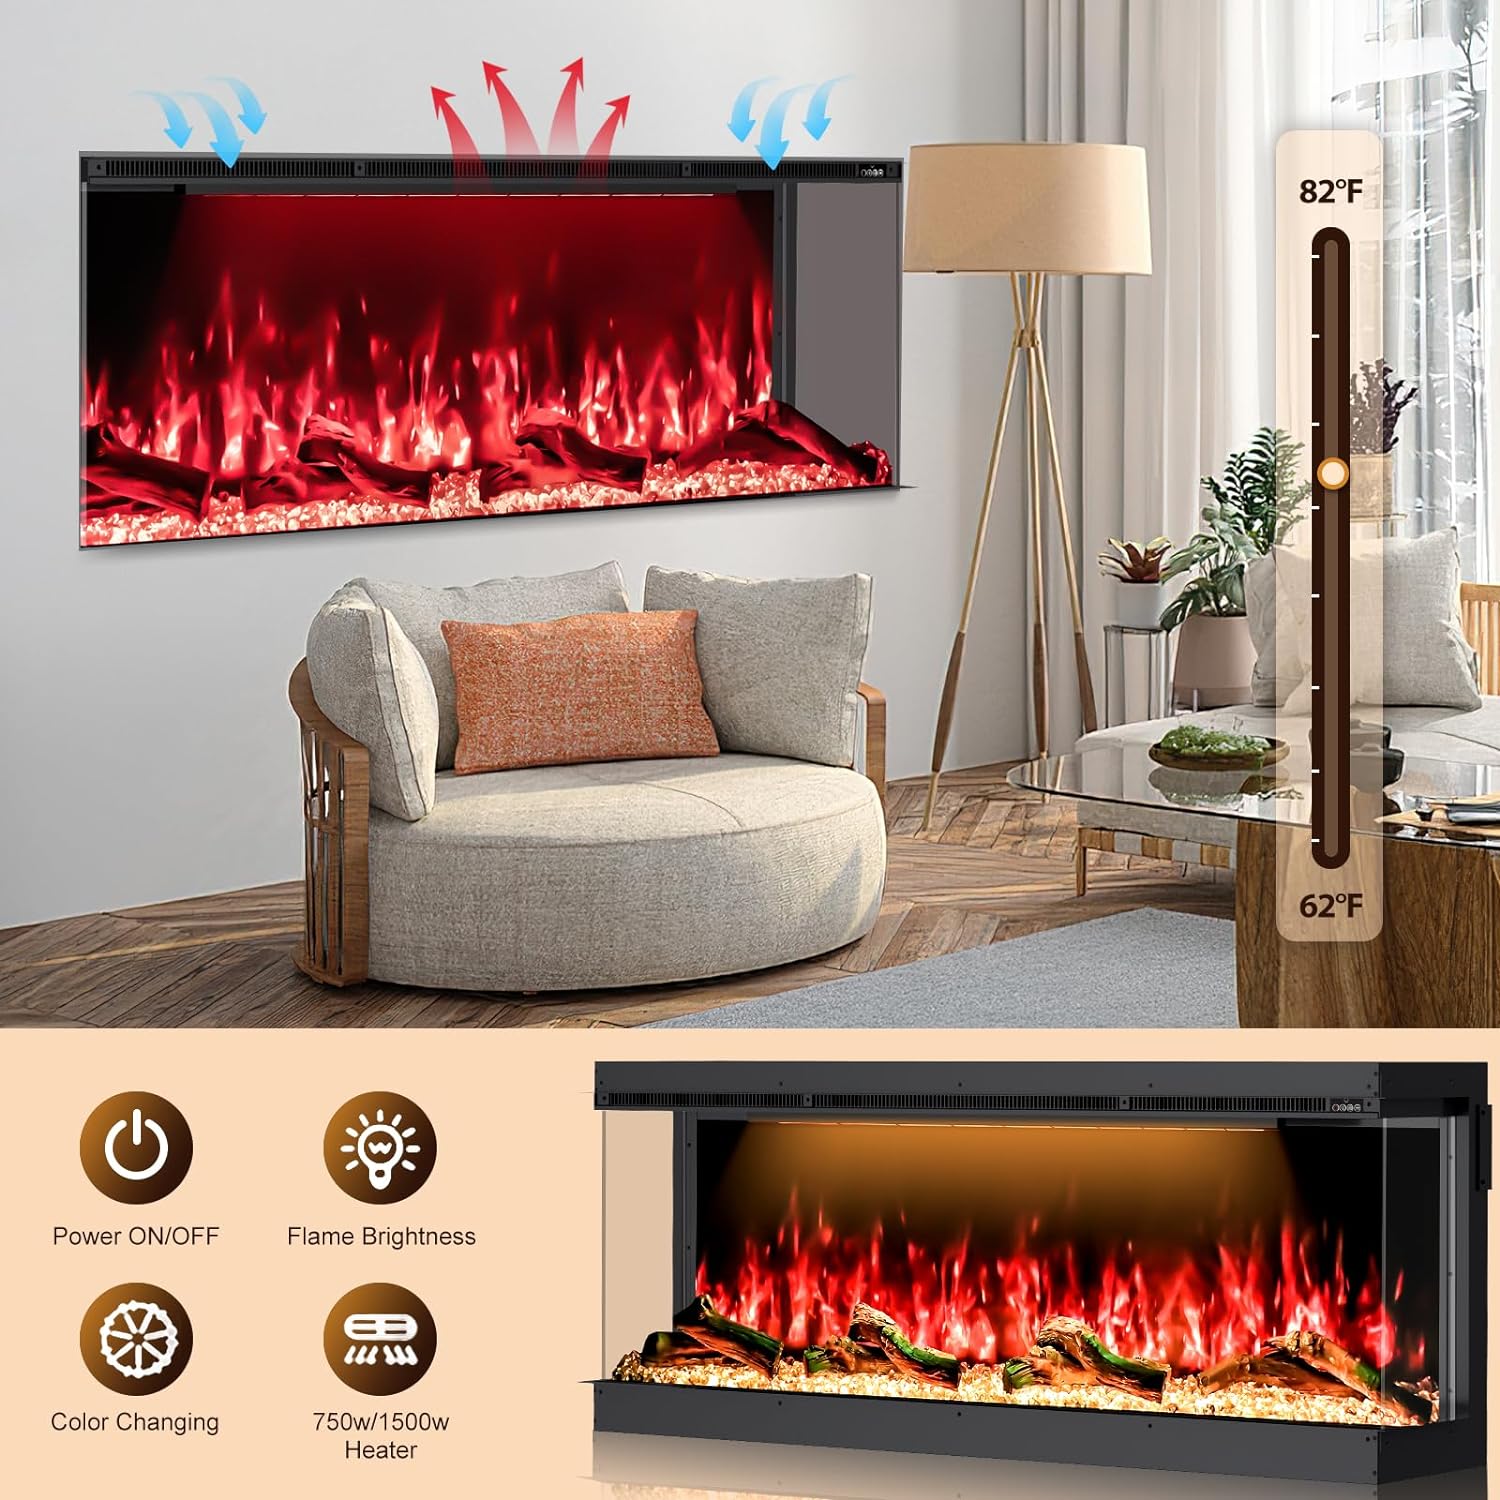 2.4G & WIFI Smart Remote Controller for HSL Series Electric Fireplace(coin cell battery included)